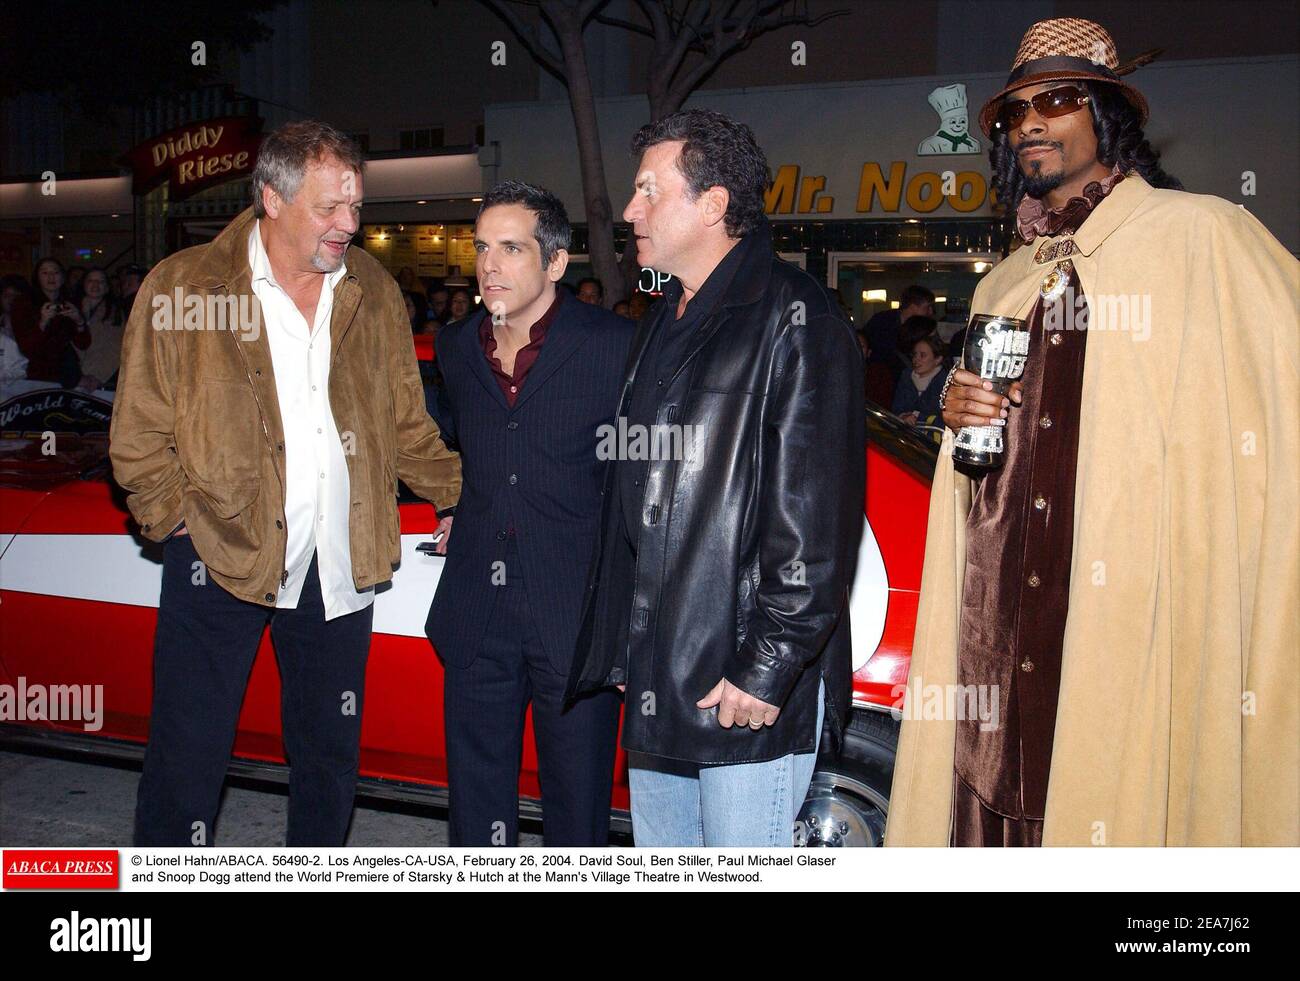 David Soul, Ben Stiller, Paul Michael Glaser and Snoop Dogg attend the World Premiere of Starsky & Hutch at the Mann's Village Theatre in Westwood. Los Angeles, February 26, 2004. (Pictured: David Soul, Ben Stiller, Paul Michael Glaser, Snoop Dogg). Photo by Lionel Hahn/Abaca. Stock Photo